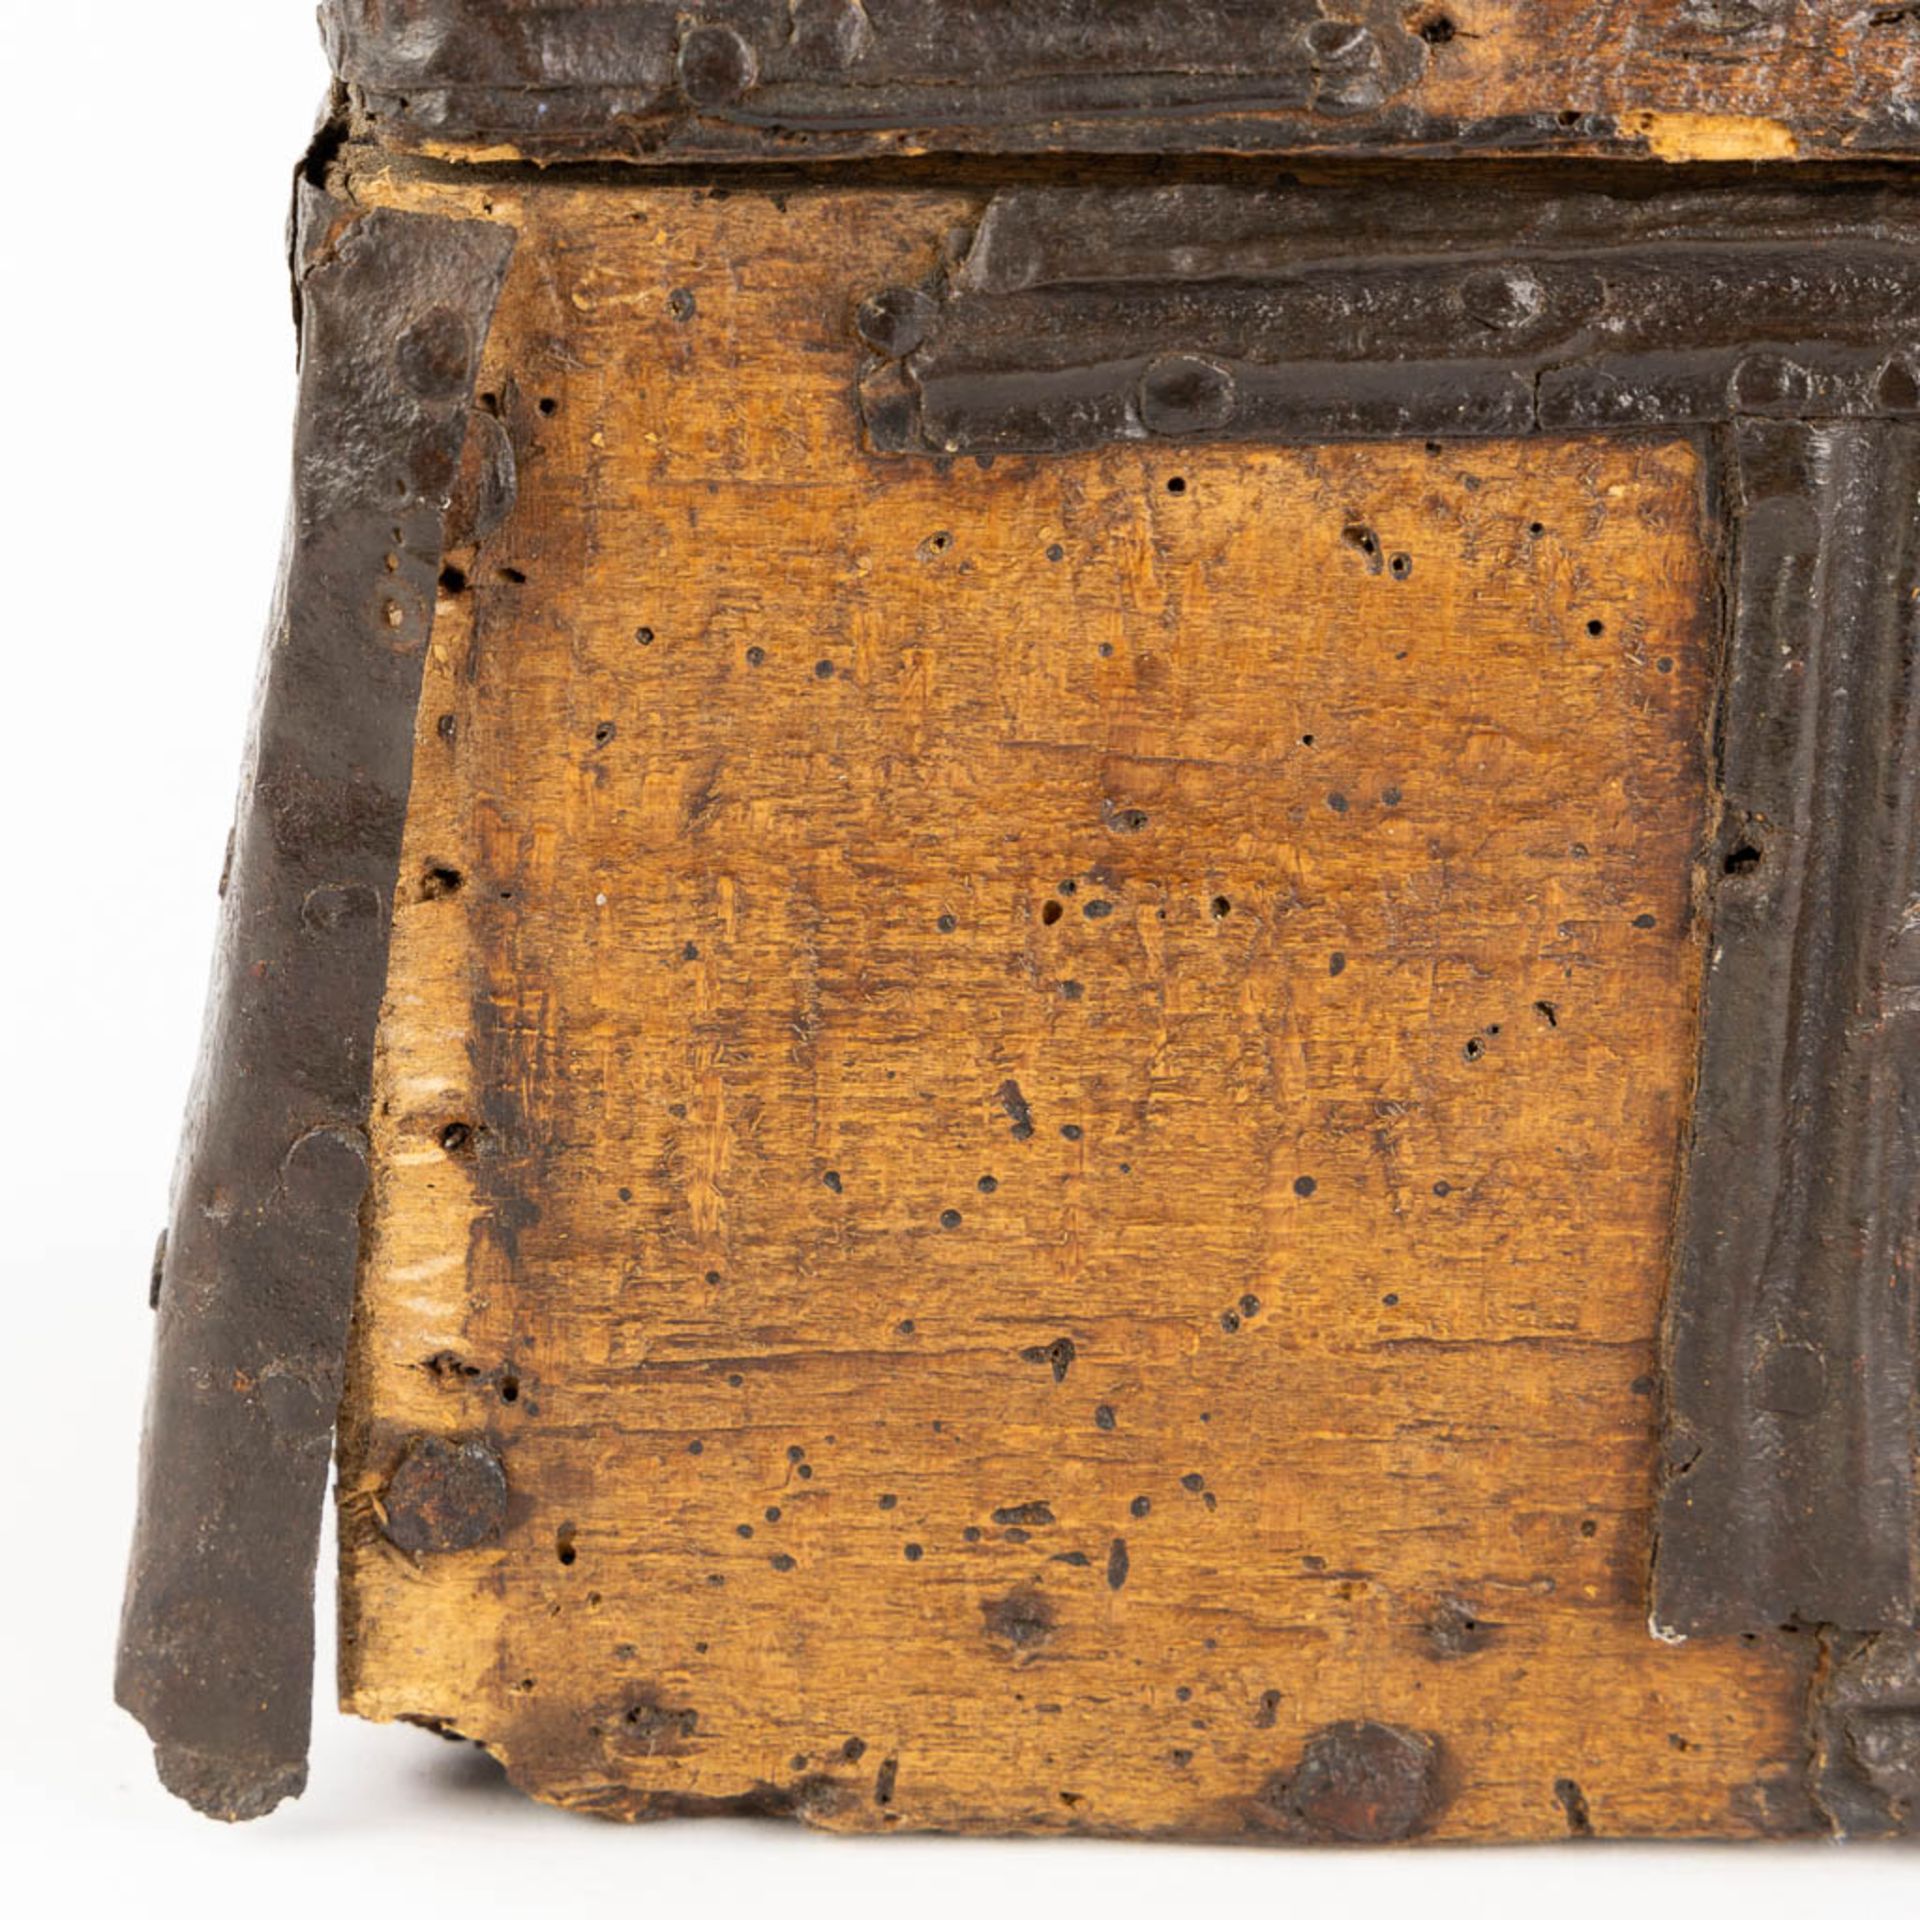 An antique money box or storage chest, wood and wrought iron, 16th/17th C. (L:20 x W:36 x H:22 cm) - Image 14 of 14